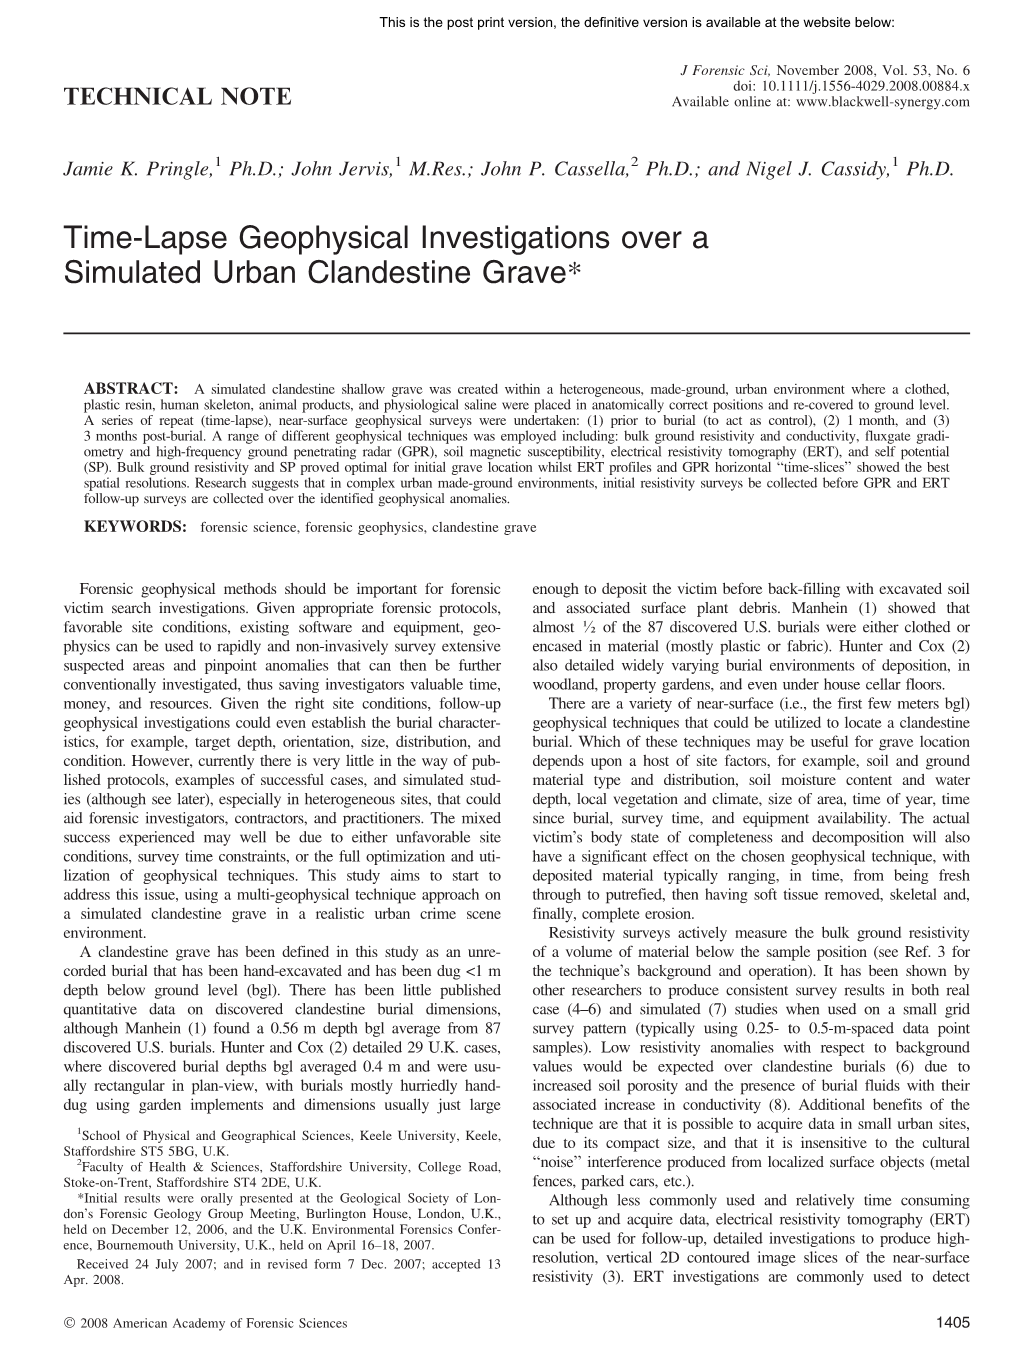 Time-Lapse Geophysical Investigations Over a Simulated Urban Clandestine Grave*